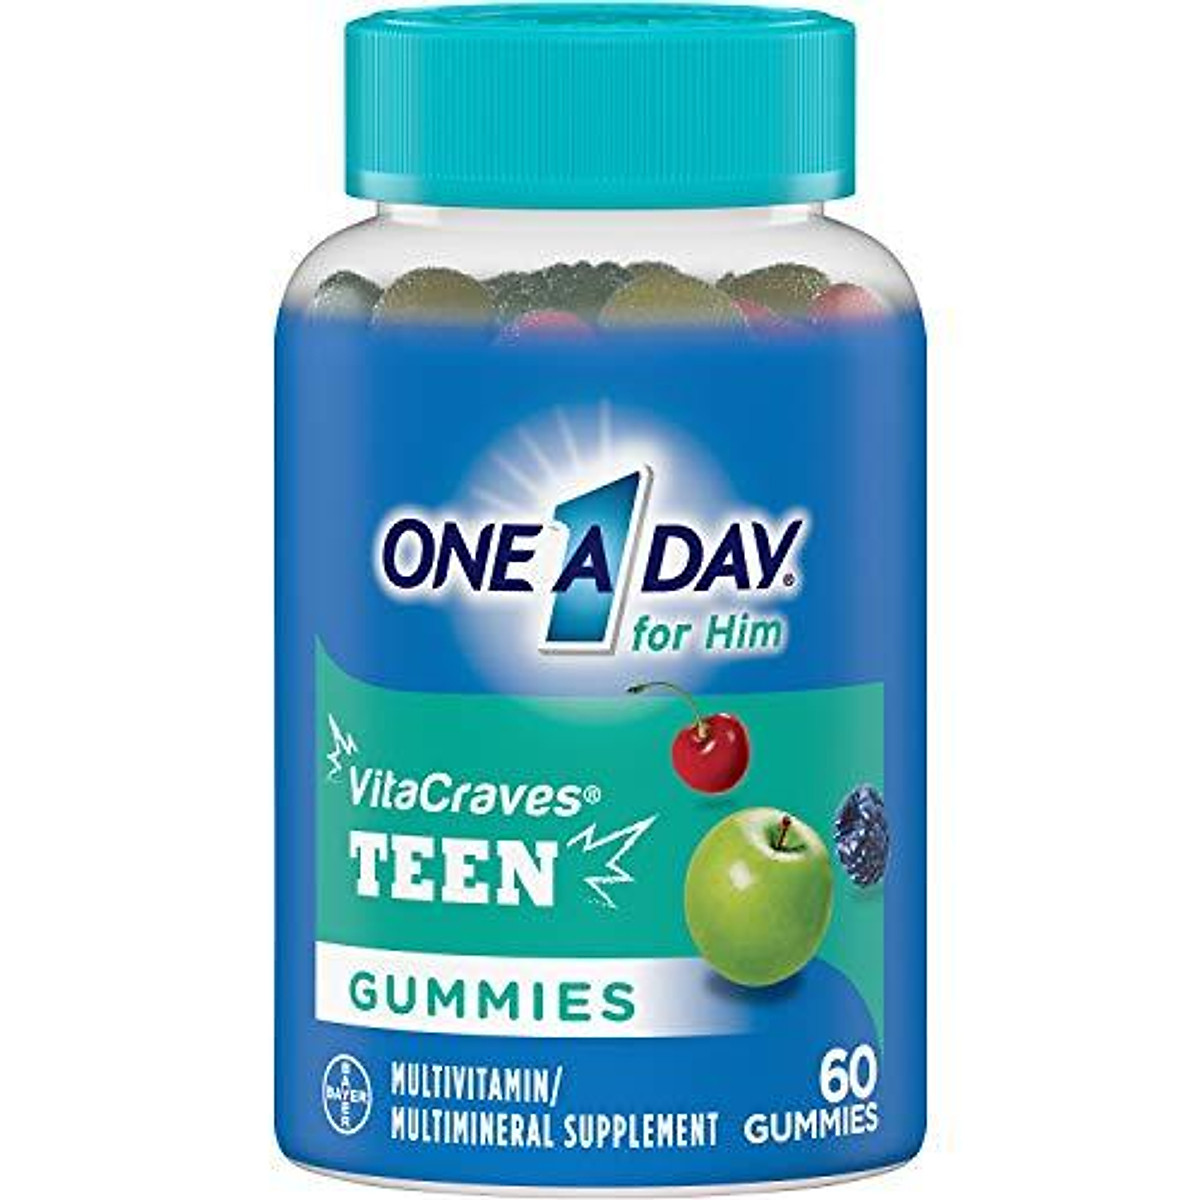 Vitamin One A Day cho teen nam One A Day for Him Vitacraves ảnh 1